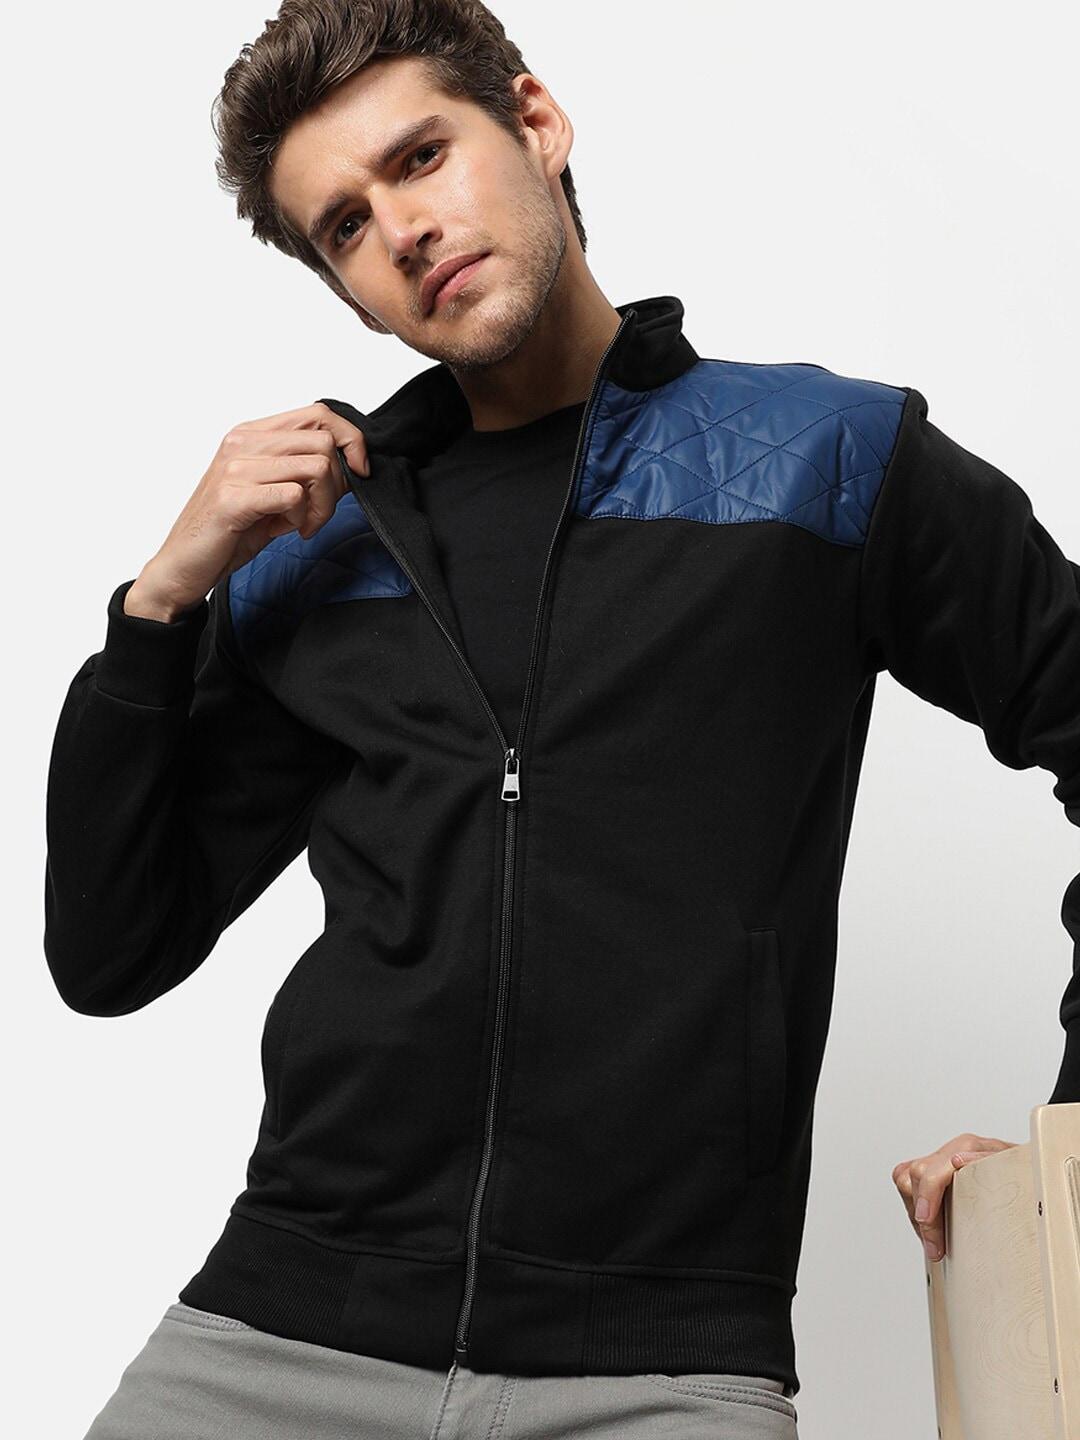 Campus Sutra Men Black Colourblocked Windcheater Outdoor Bomber with Embroidered Jacket